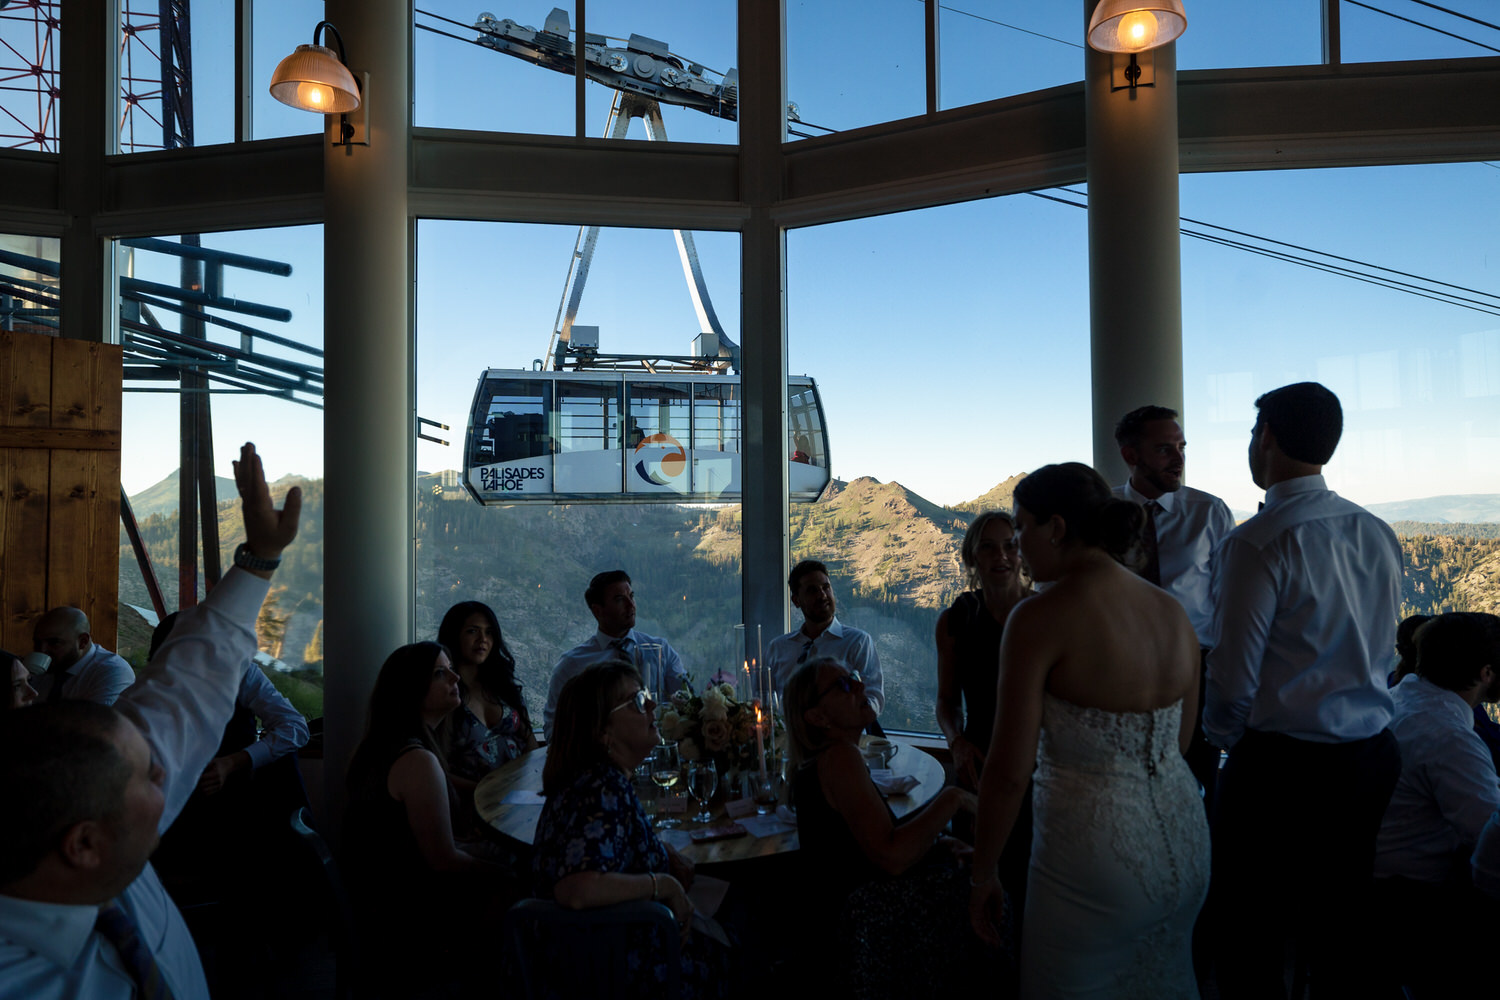 View of the Palisades aerial tram from inside the Terrace Restaurant and Bar.